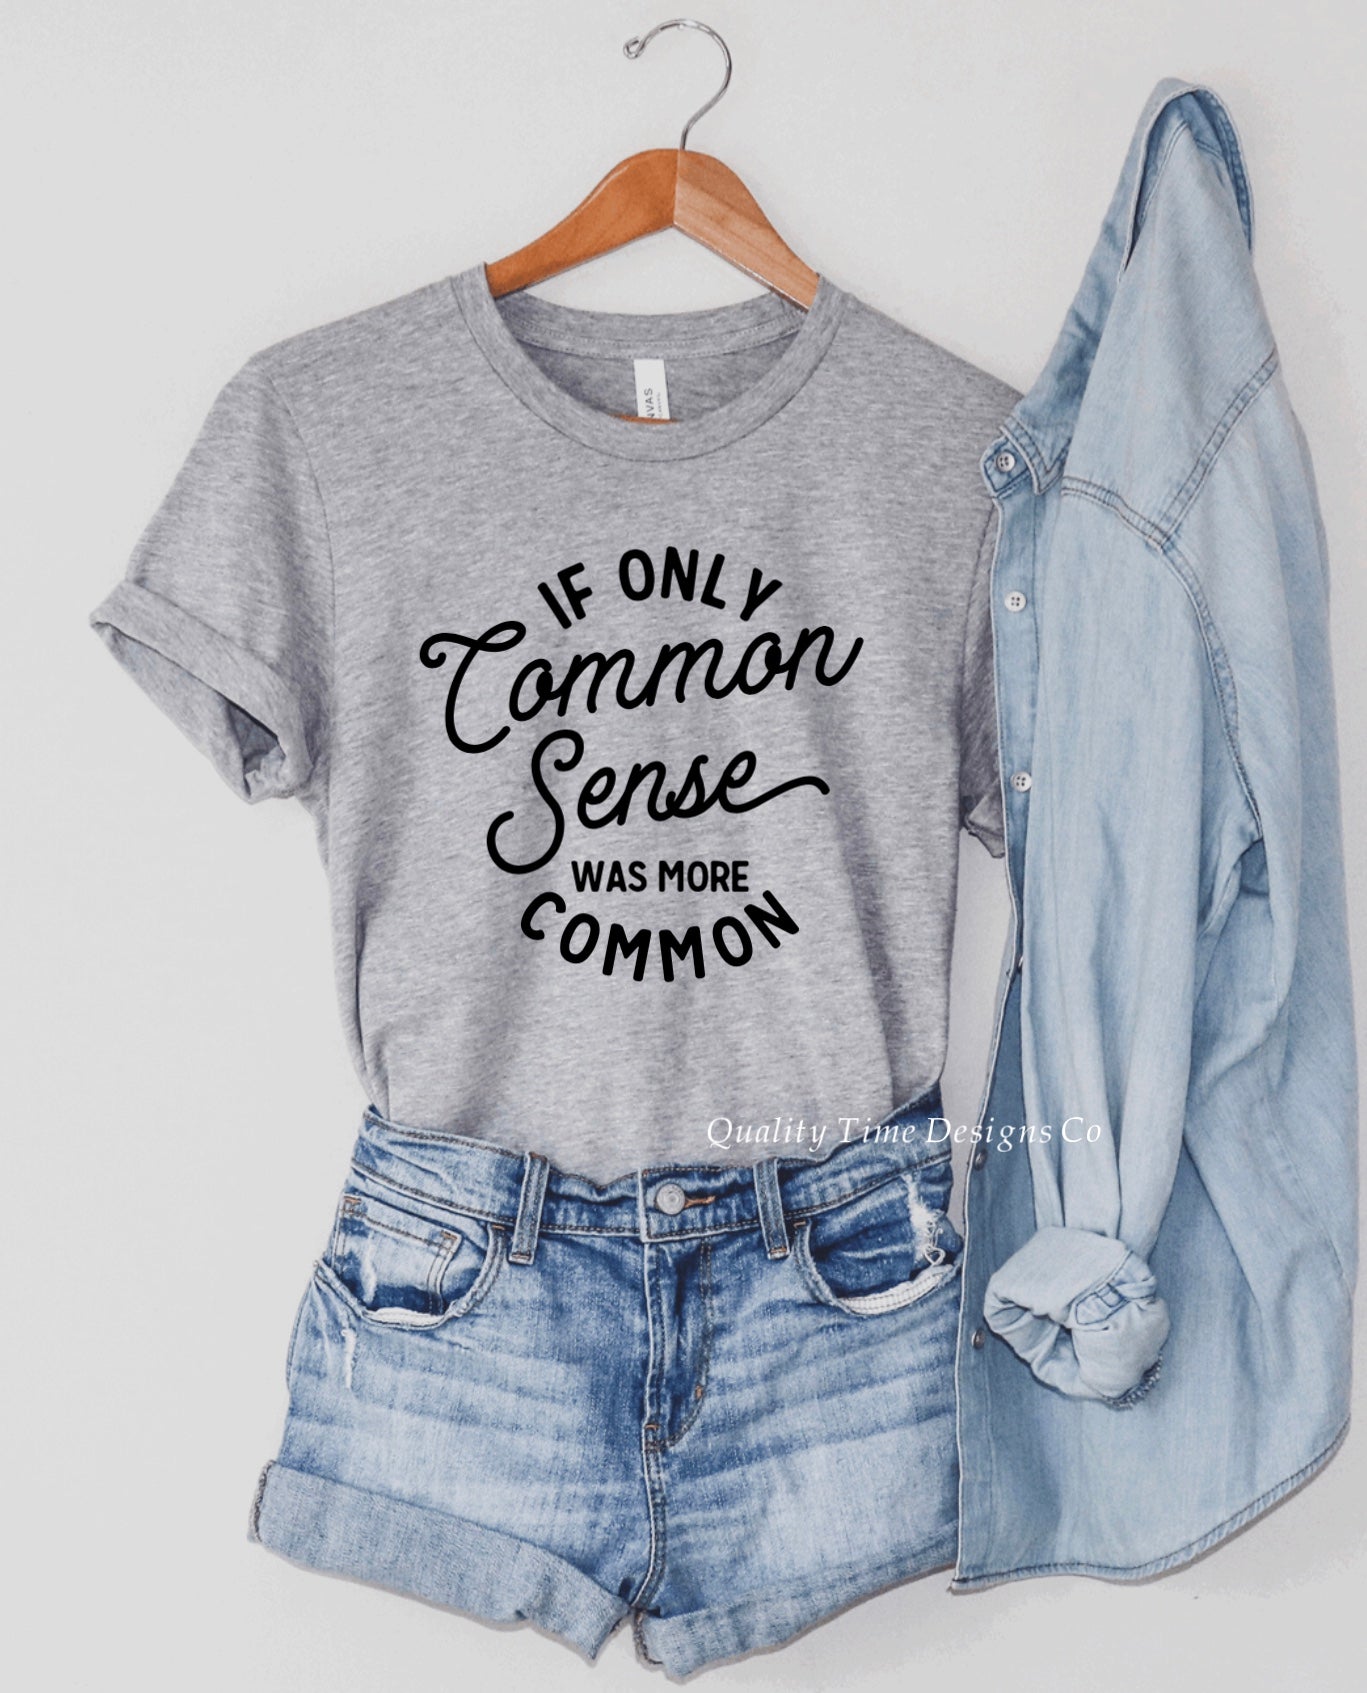 If Only common sense was more common t-shirt 